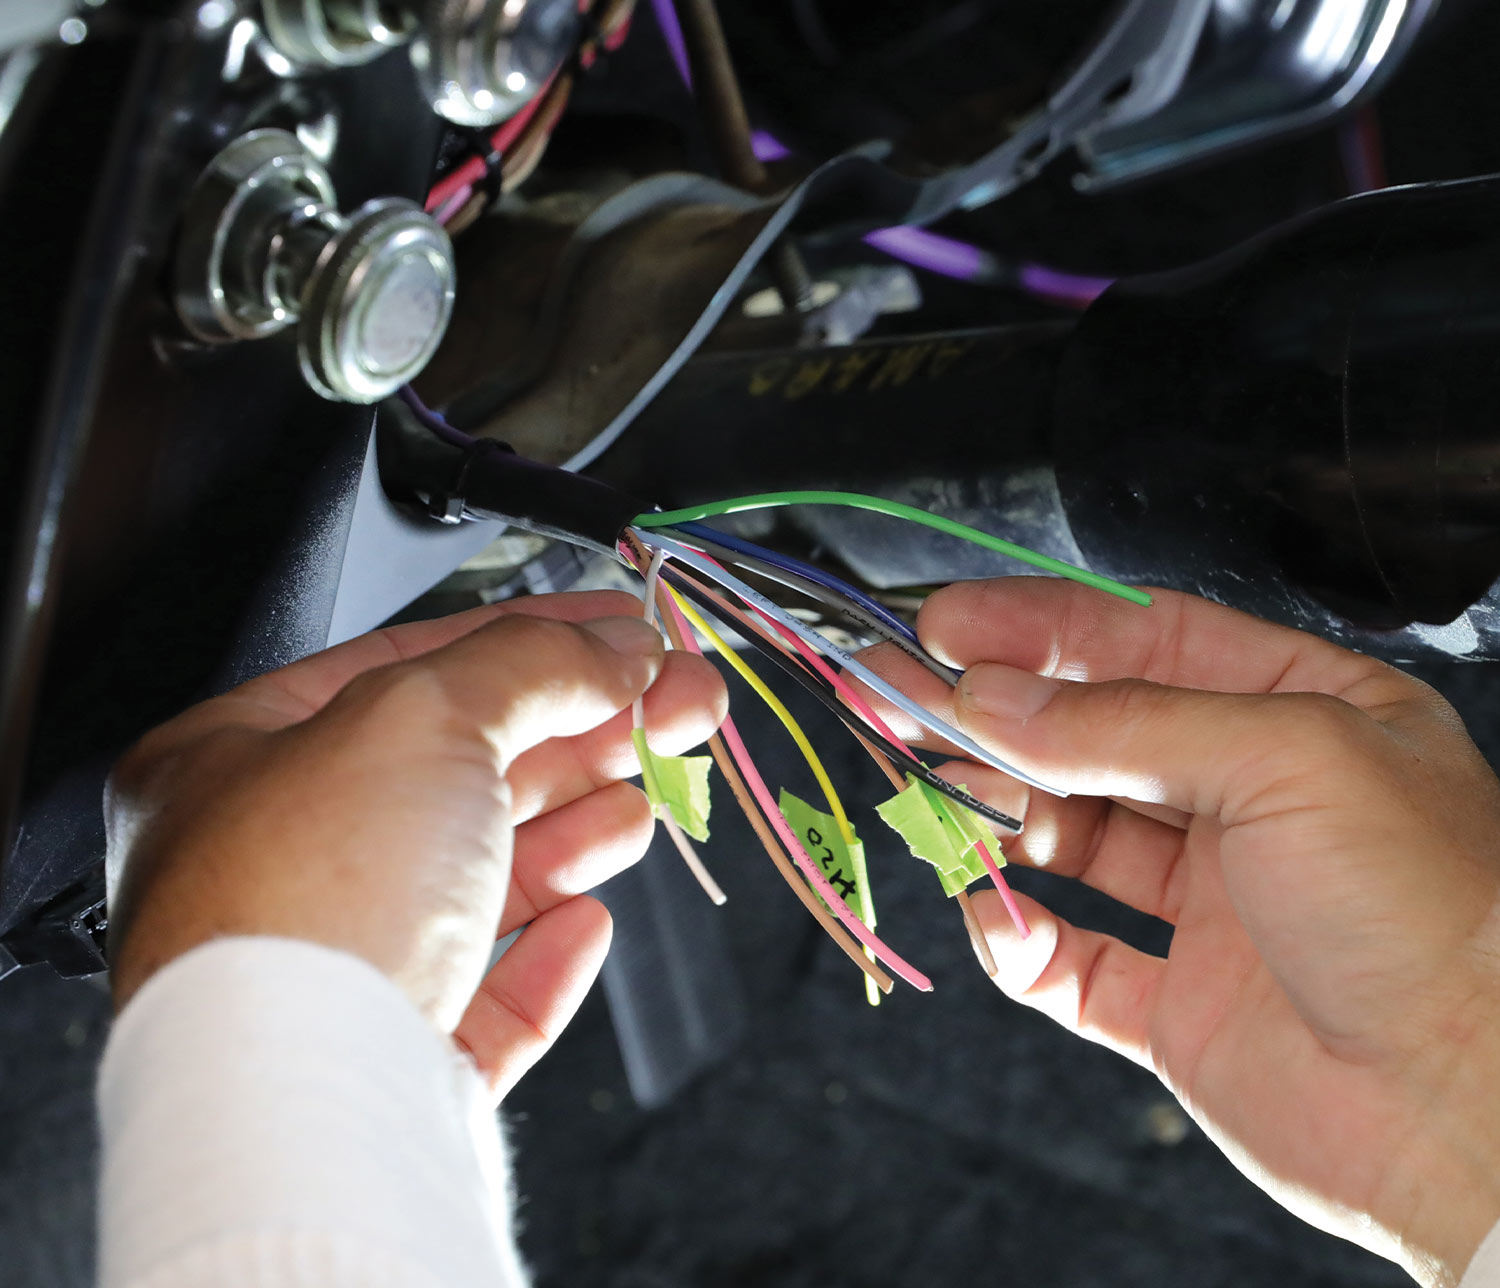 mechanic hands hold the vehicle harness wires labeled with tape strips for organization